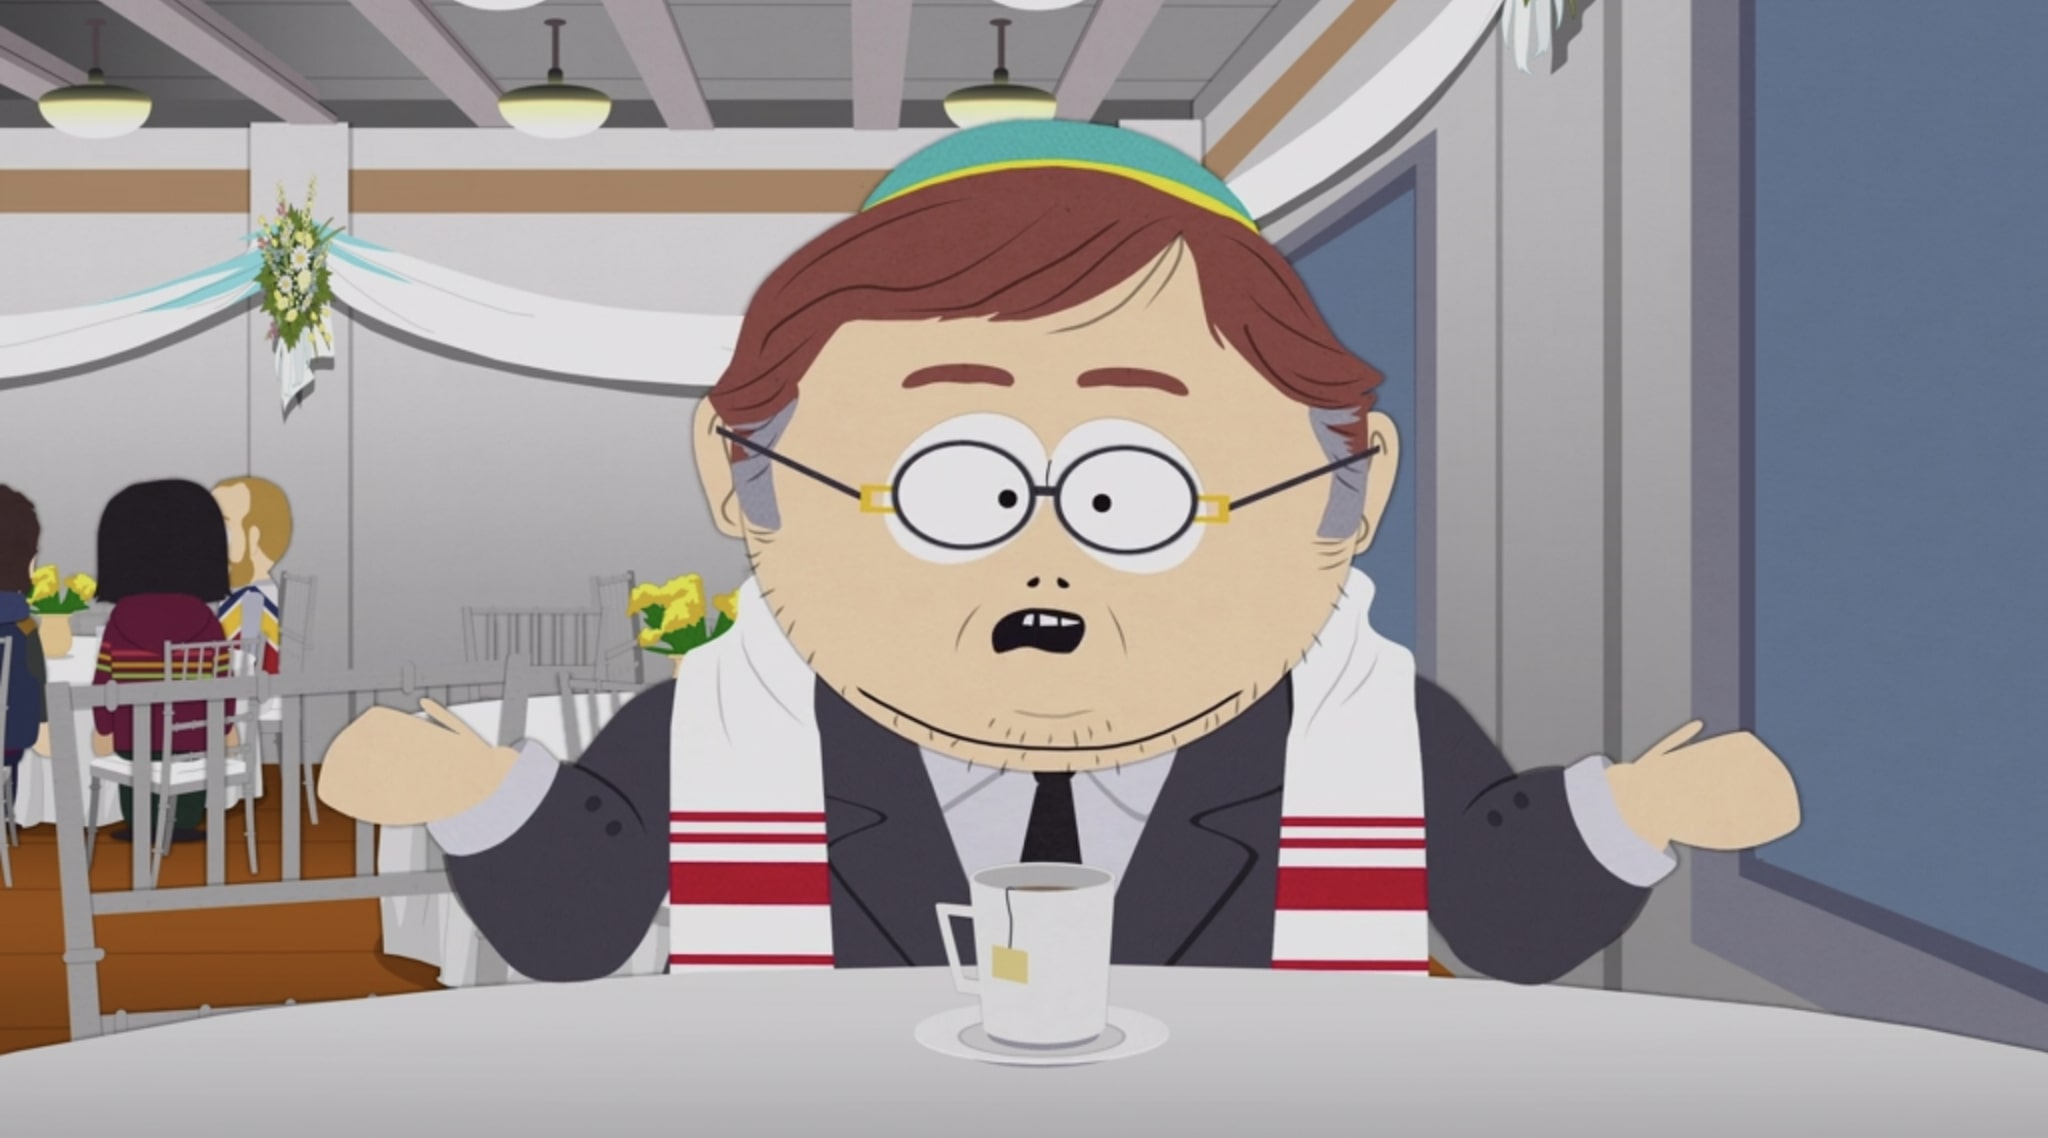 After decades of tormenting Jews, South Park's Cartman converts to Judaism